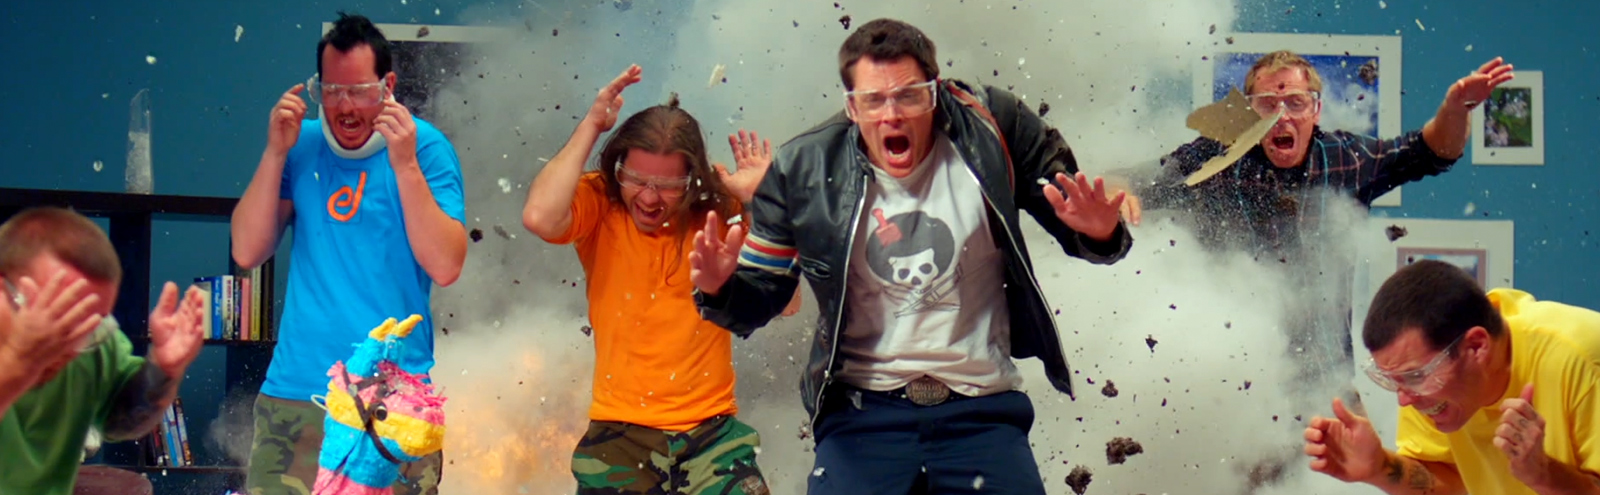 Jackass 3D Explosion Johnny Knoxville